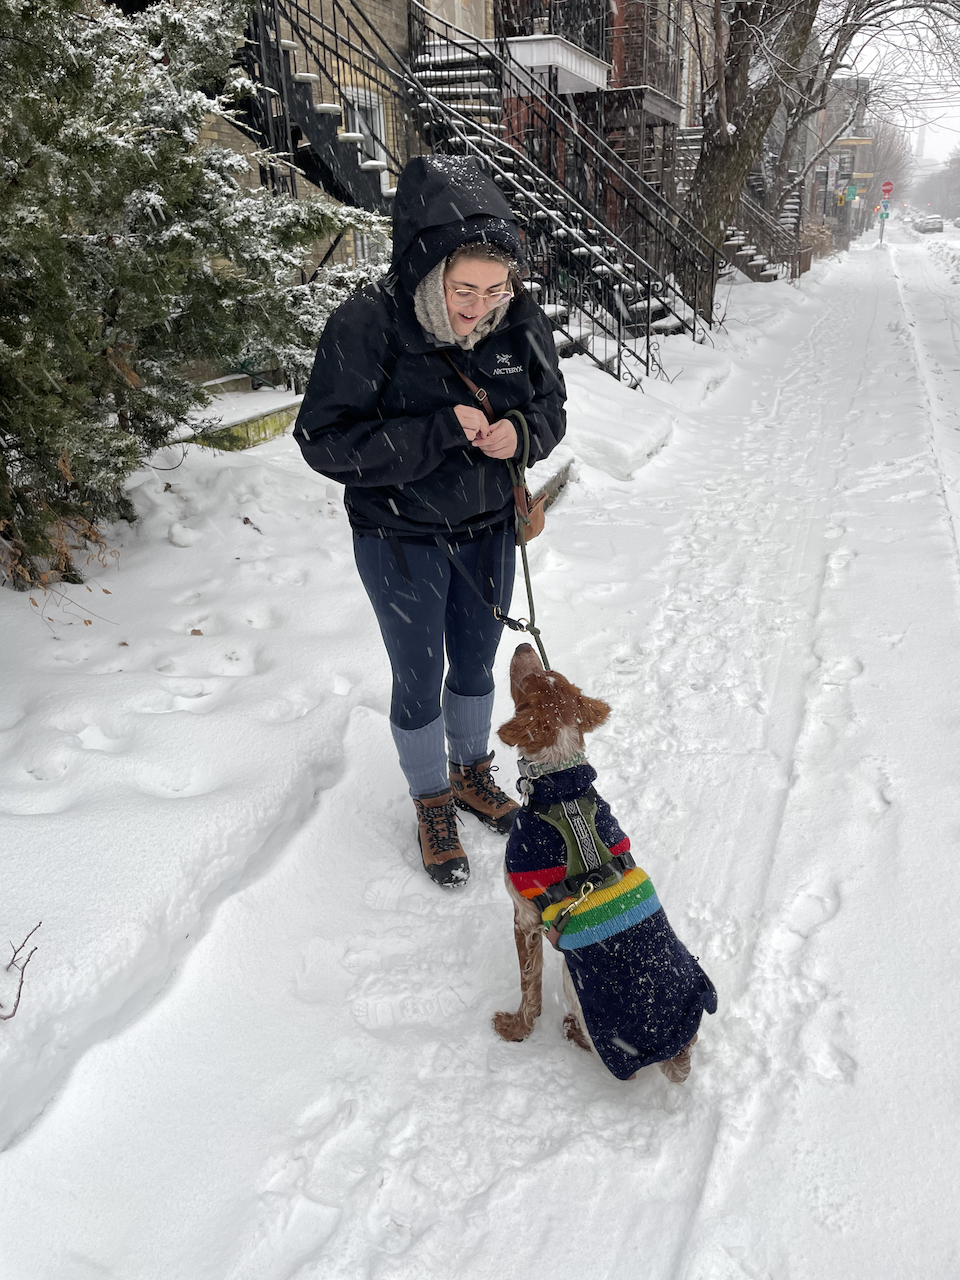 Our first winter with Pippin, in photos